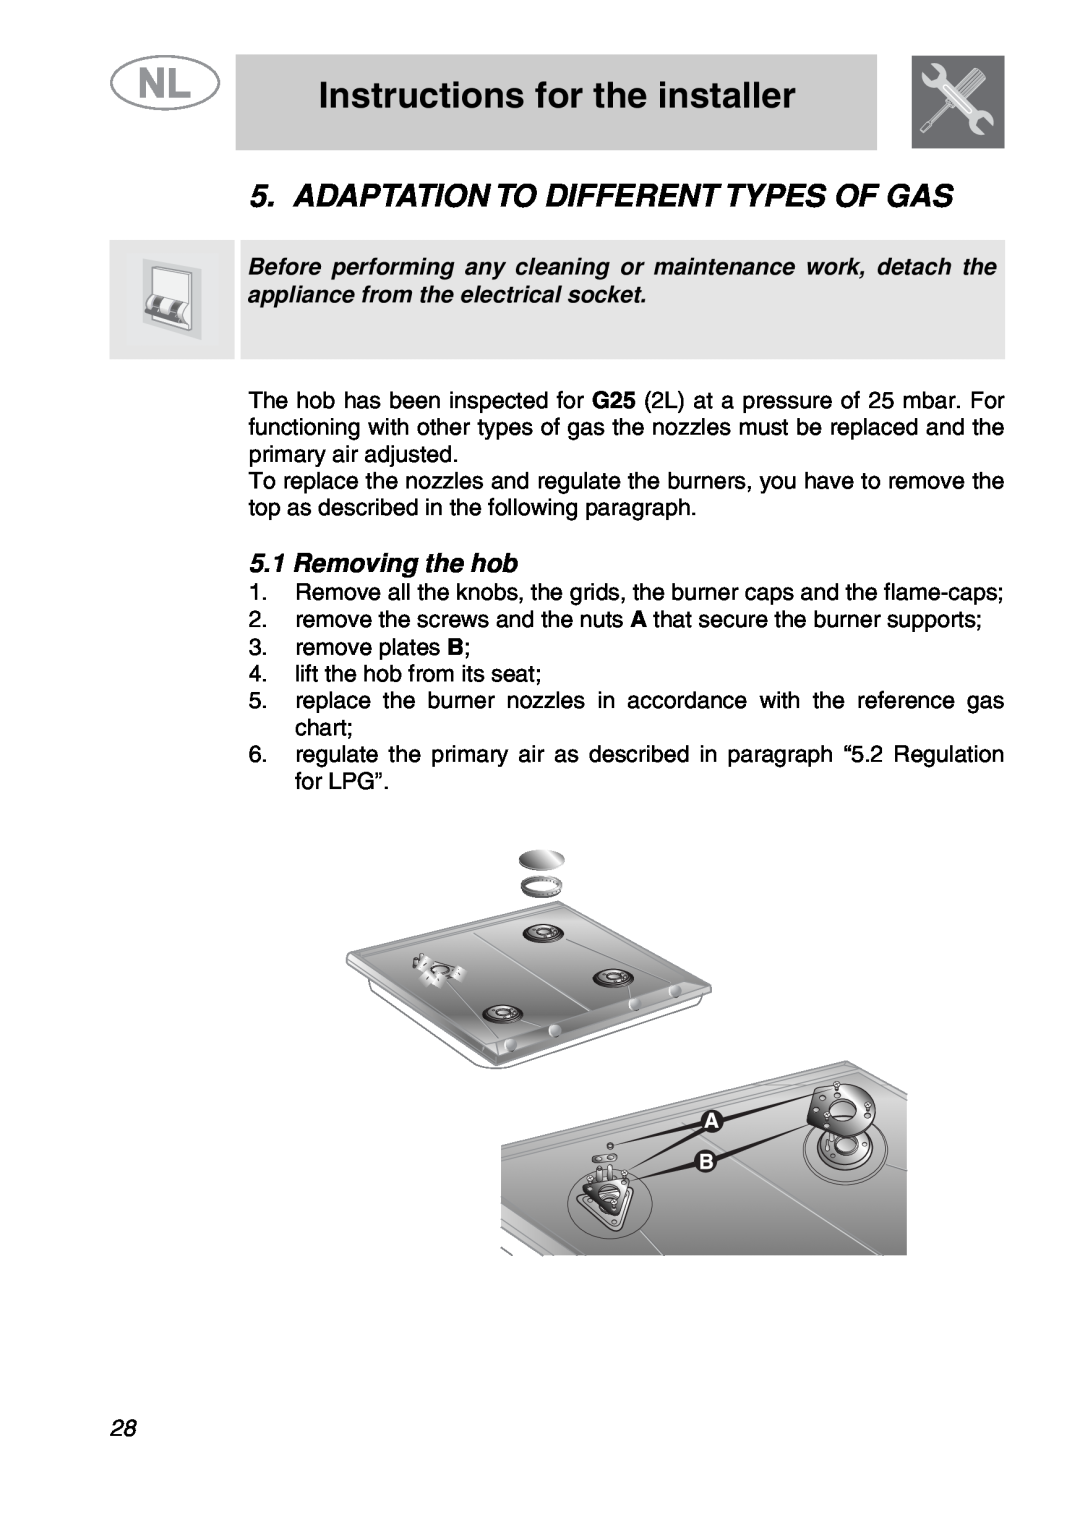 Smeg GKC955, GKCO955 manual Adaptation To Different Types Of Gas, Removing the hob, Instructions for the installer 